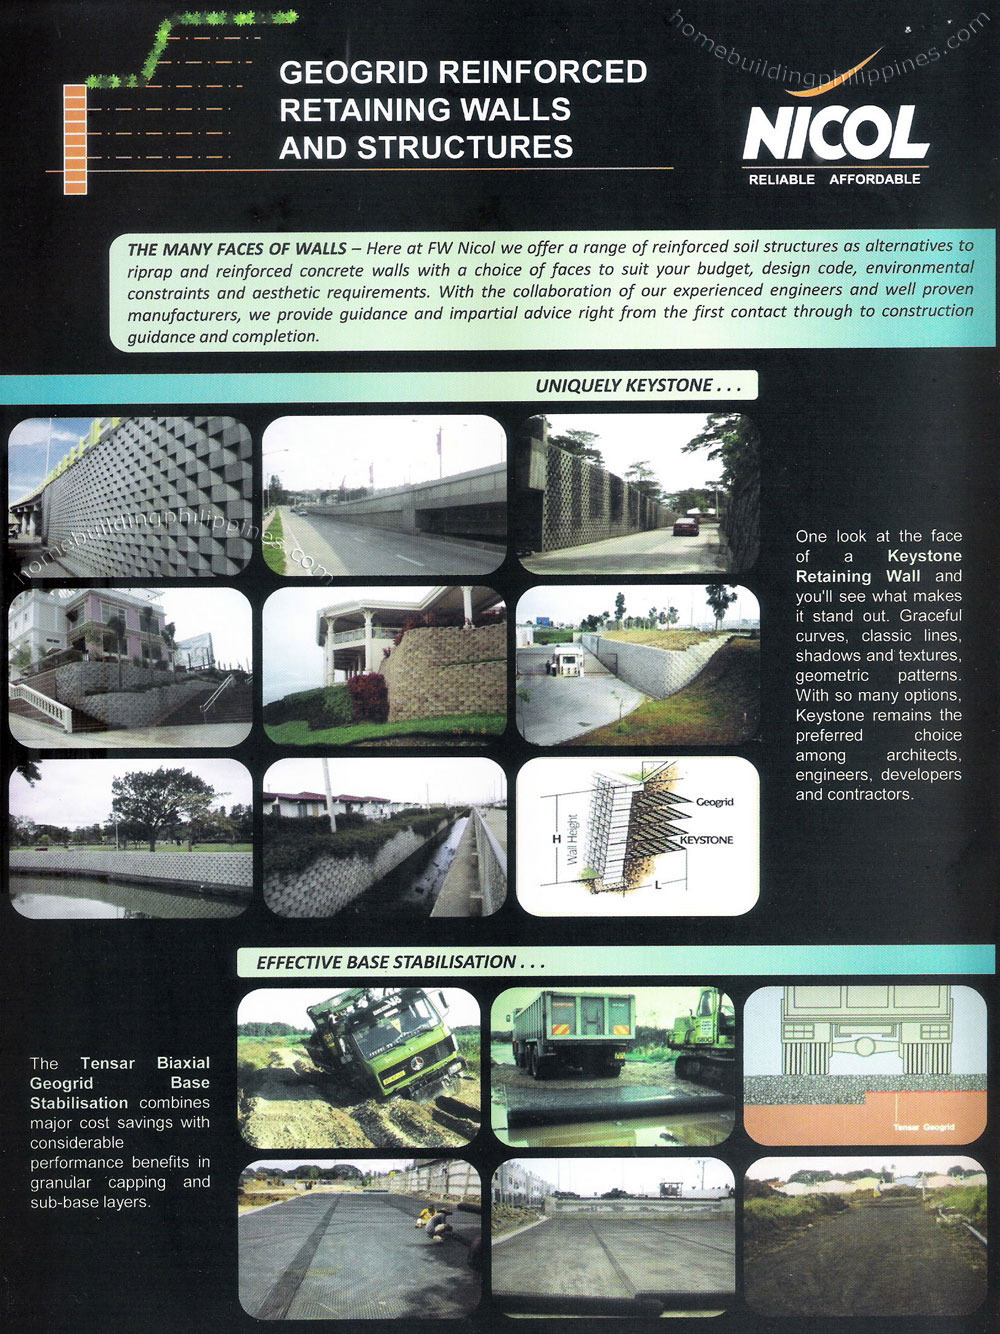 Geogrid Reinforced Retaining Walls and Structures